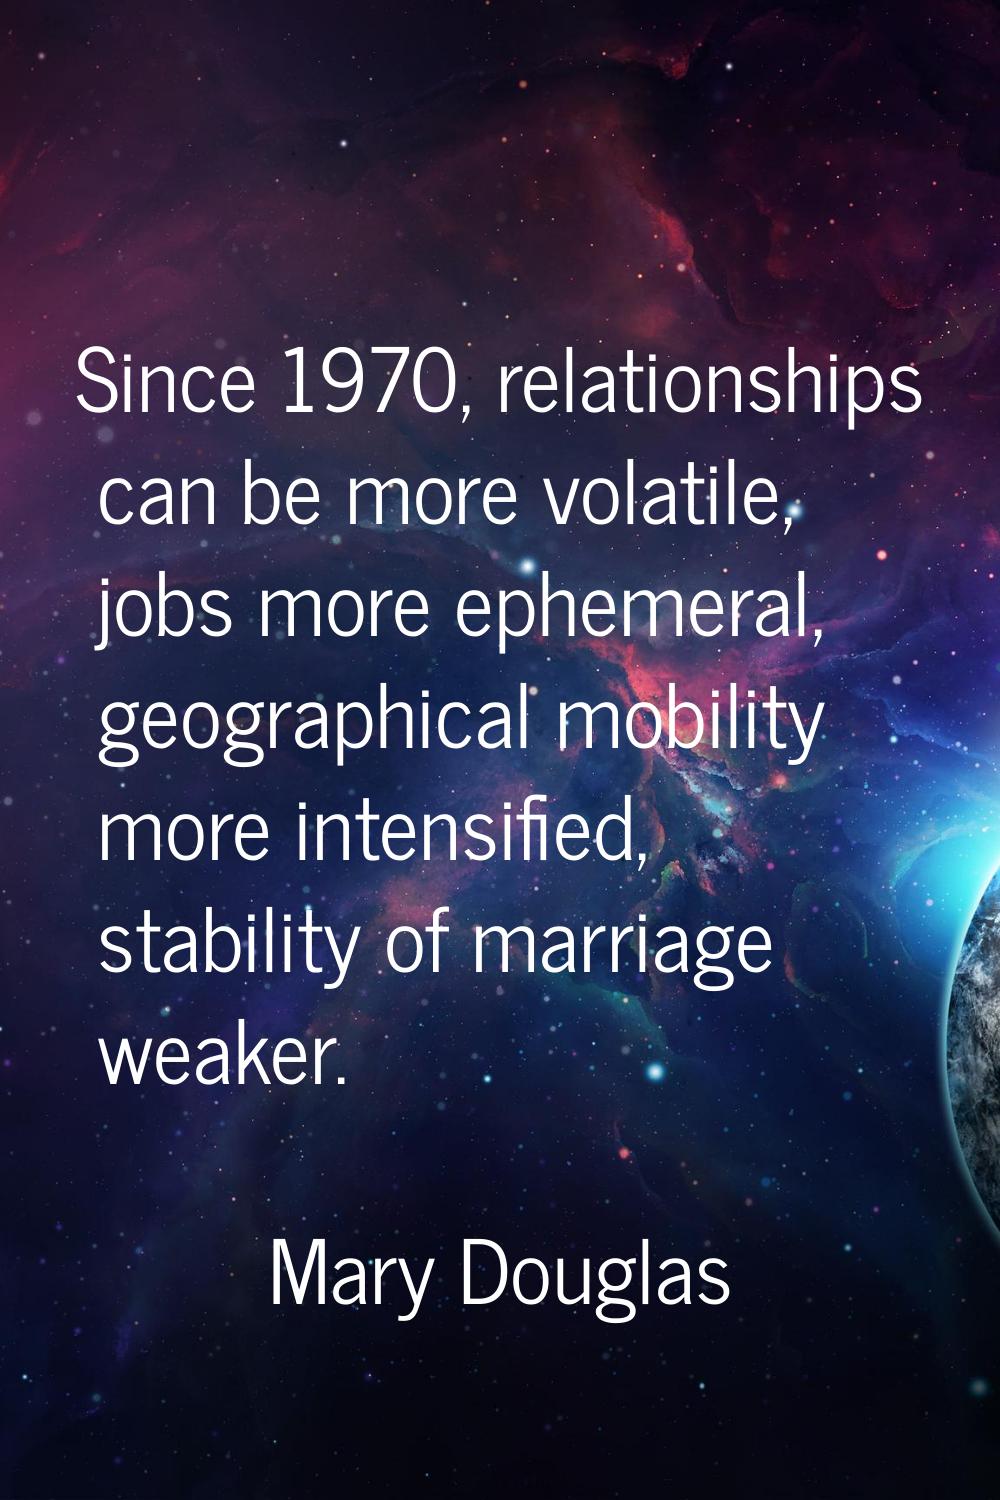 Since 1970, relationships can be more volatile, jobs more ephemeral, geographical mobility more int